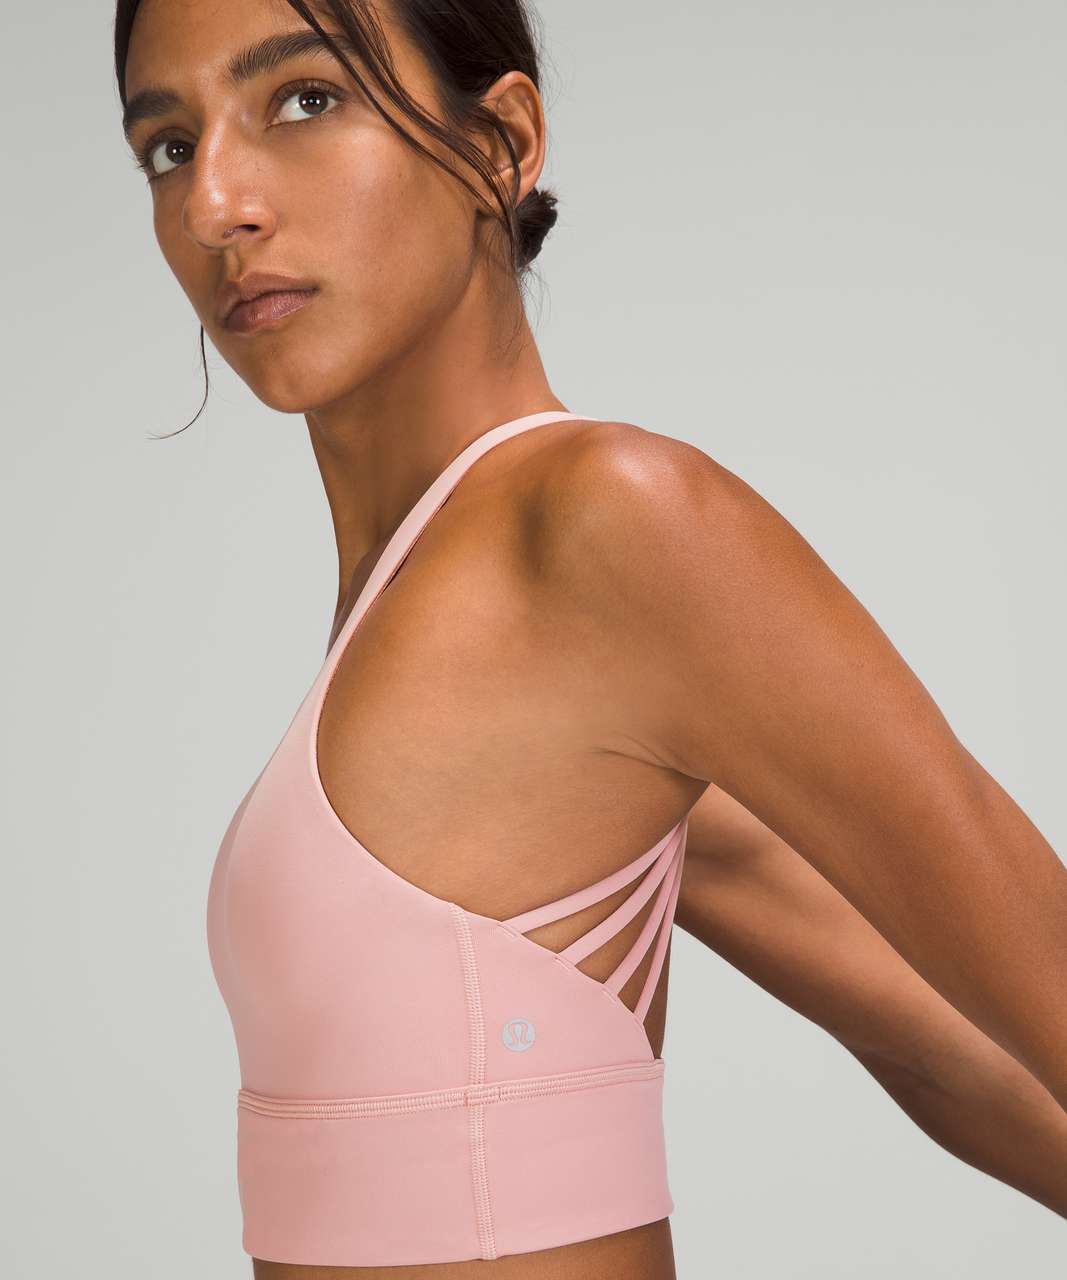 Lululemon Free to Be High-Neck Longline Bra - Wild *Light Support, A/B Cup - Pink Puff